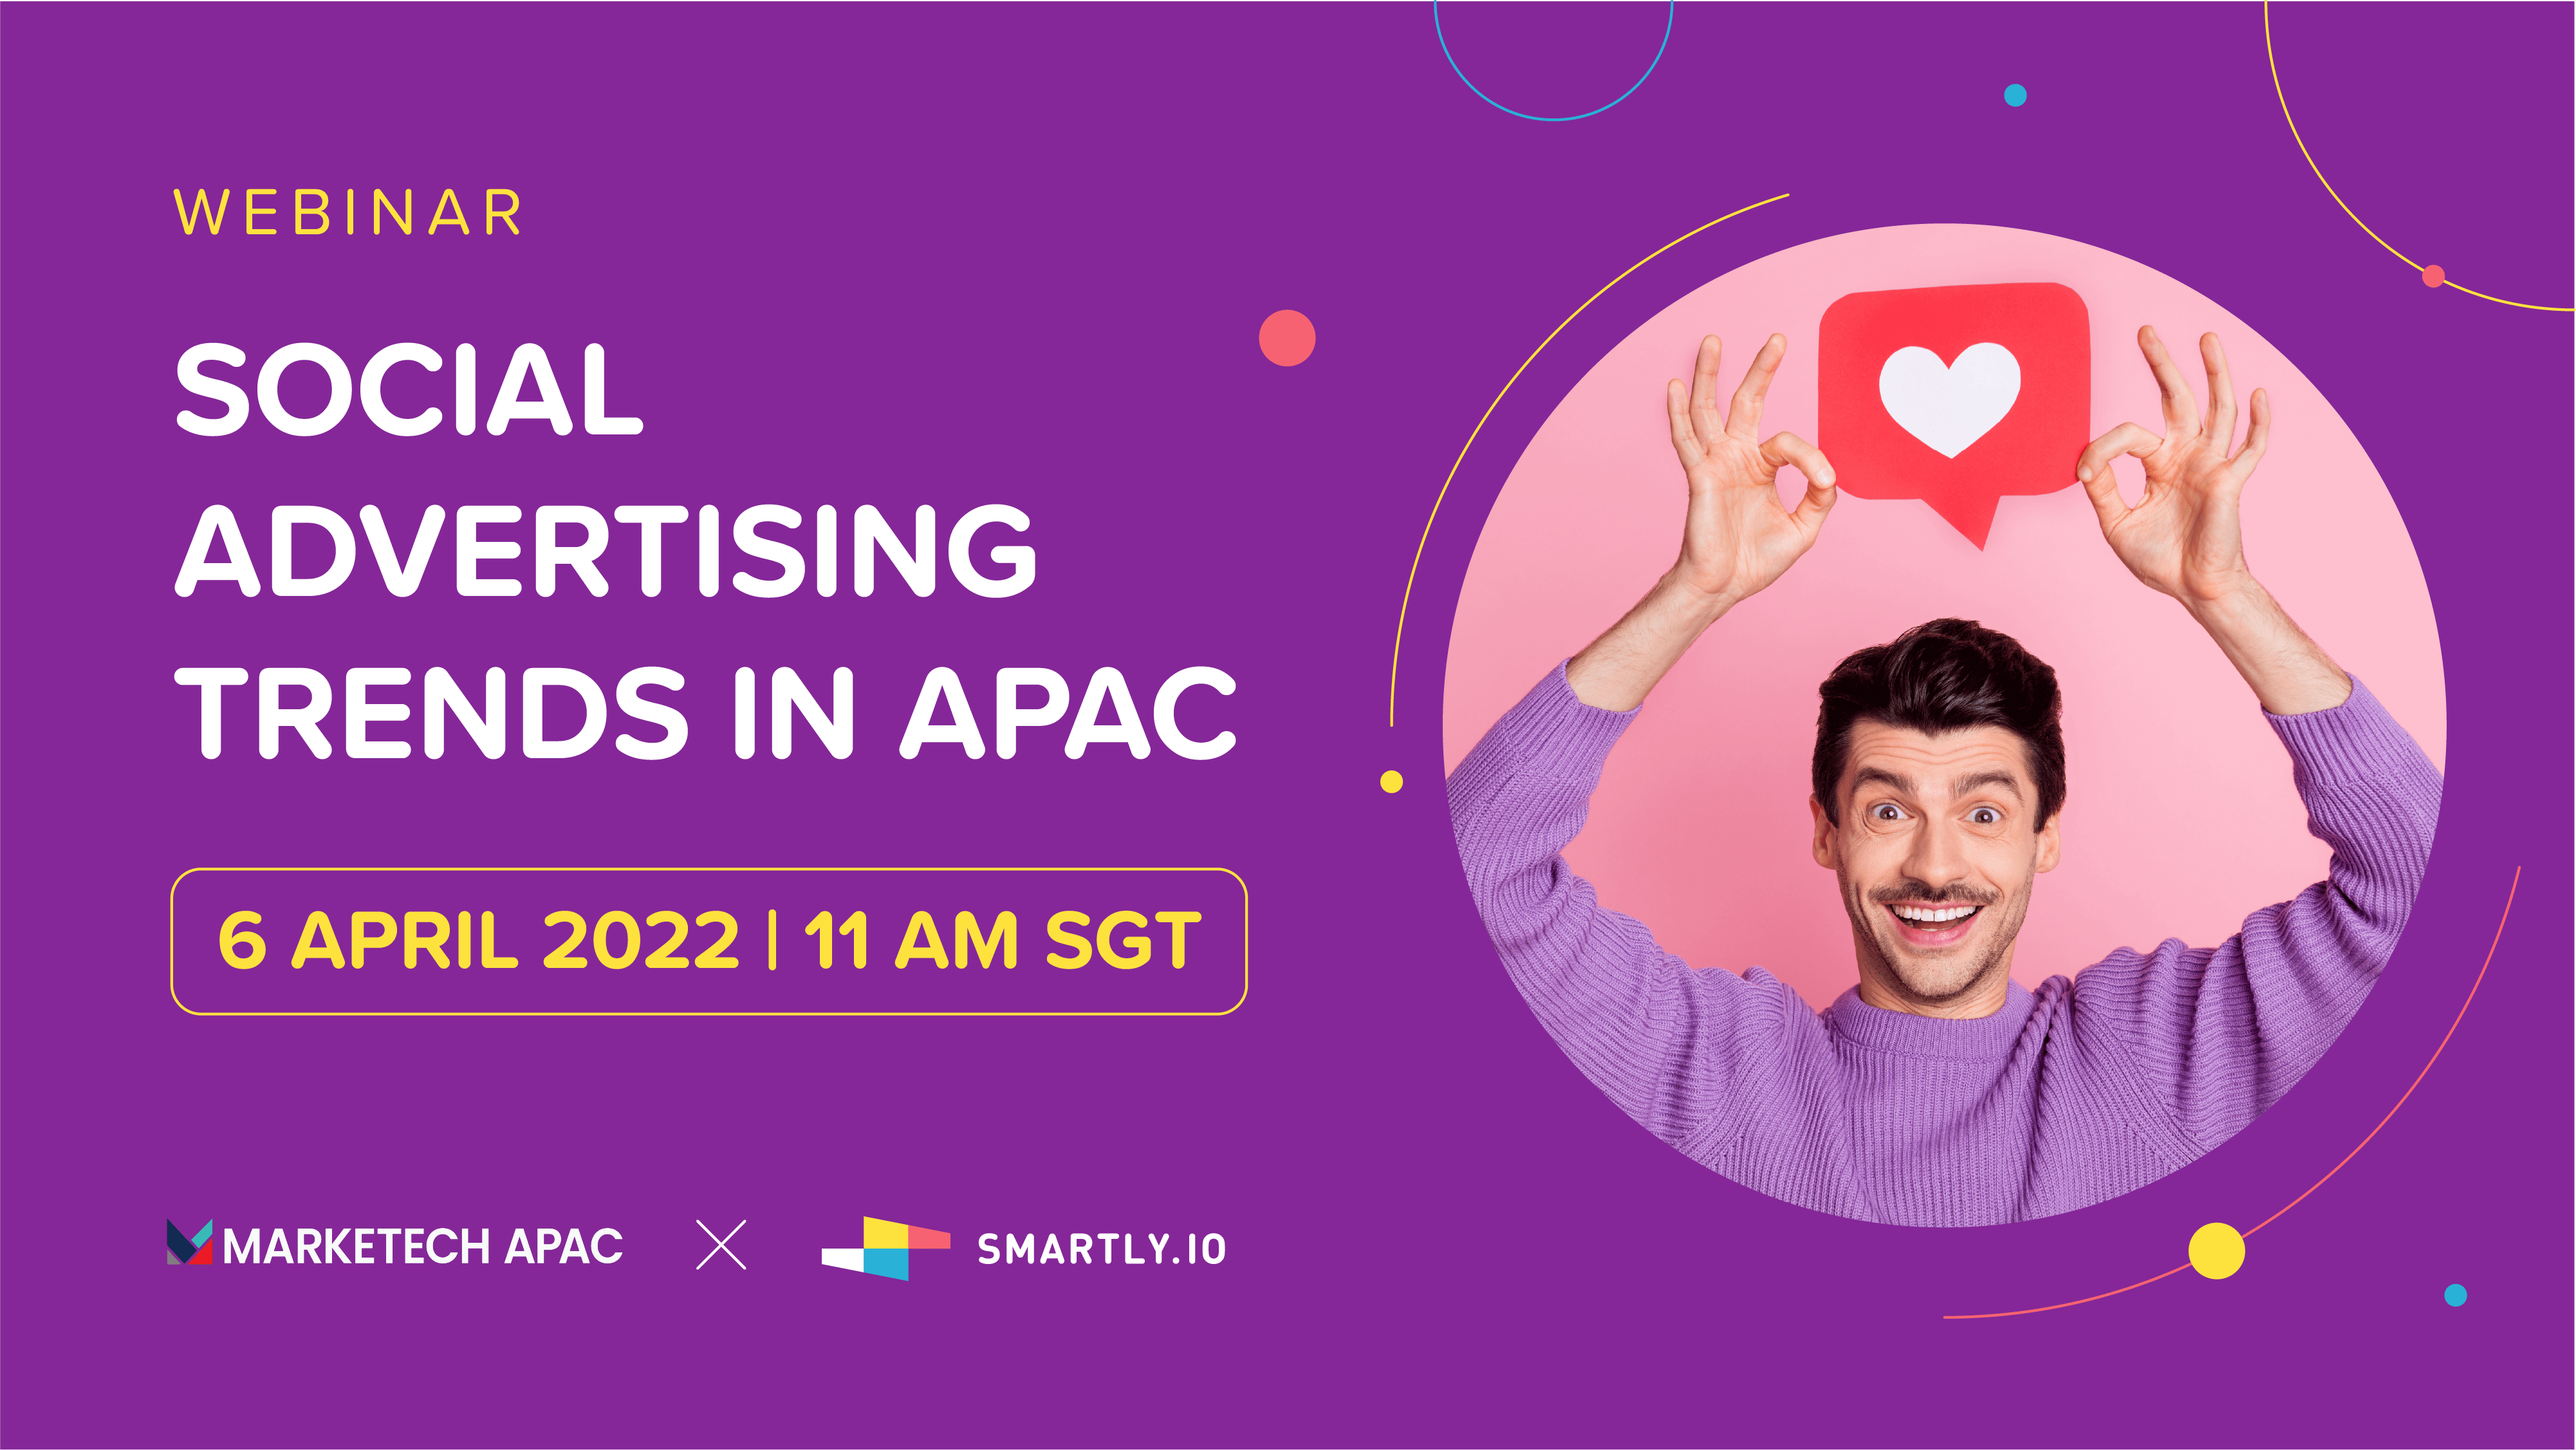 Smartly_Social Advertising Trends in APAC 2022